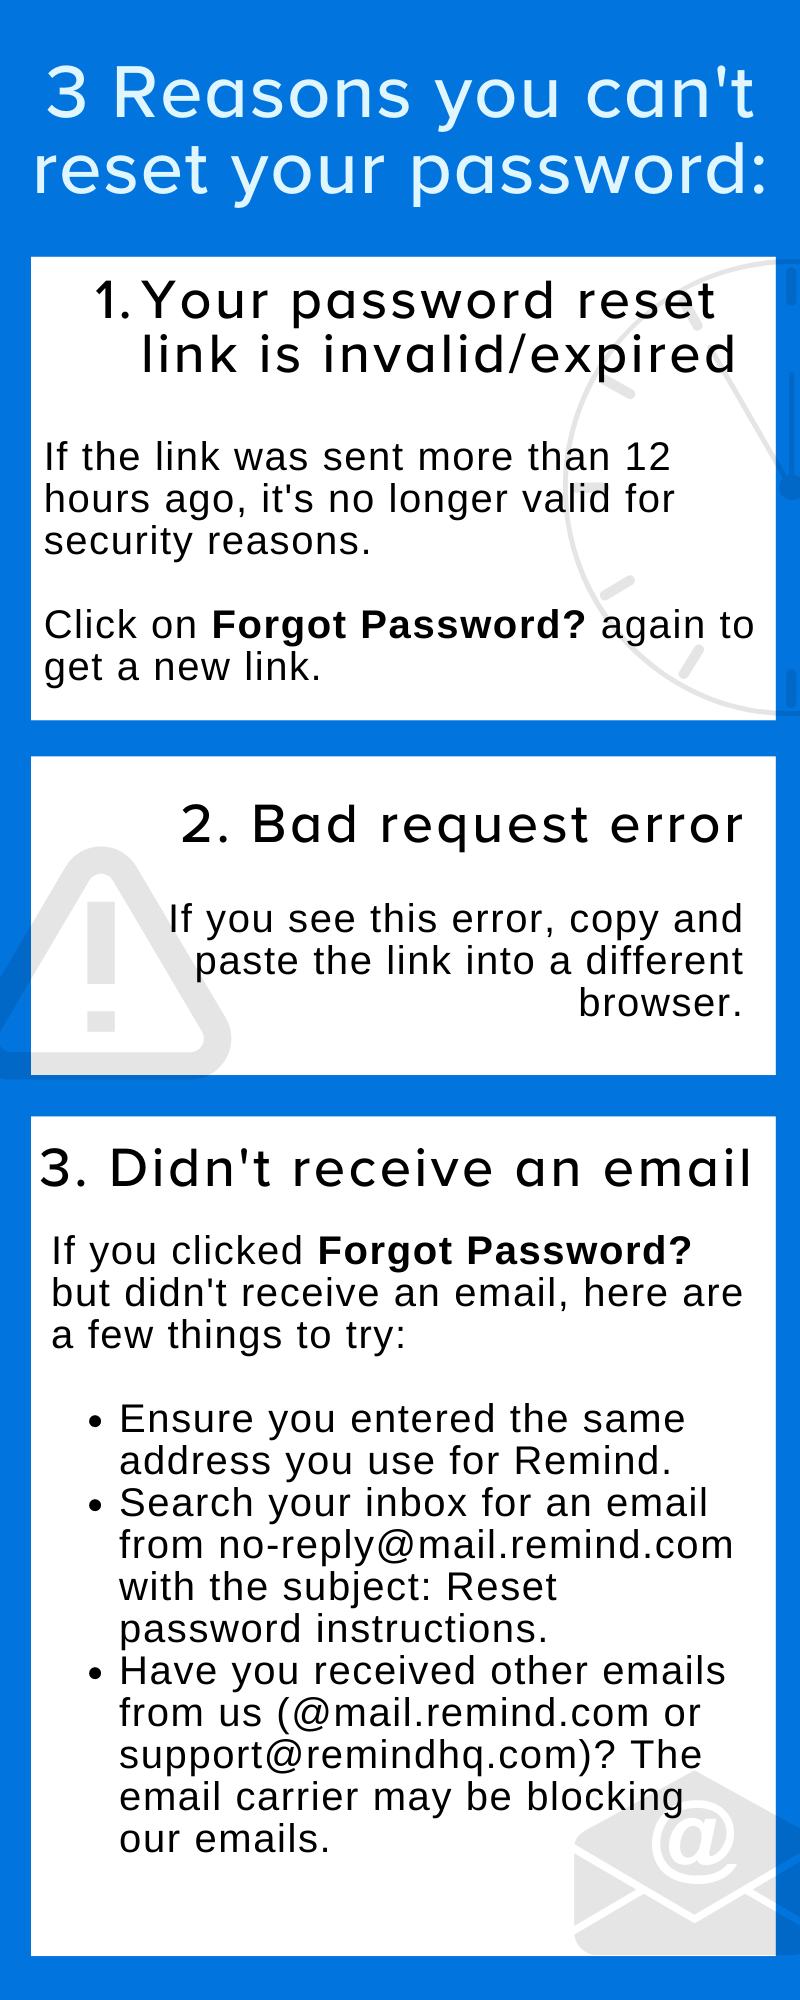 3 Reasons you can't reset your password: 1. Your password reset link is invalid/expired. If the link was sent more than 12 hours ago, it's no longer valid for security reasons. Click on “Forgot Password?” again to get a new link. 2. Bad request error. If you see this error, copy and paste the link into a different browser. 3. Didn't receive an email. If you clicked Forgot Password? but didn't receive an email, here are a few things to try: Ensure you entered the same address you use for Remind. Search your inbox for an email from no-reply@mail.remind.com with the subject: Reset password instructions. Have you received other emails from us (@mail.remind.com or support@remindhq.com)? The email carrier may be blocking our emails.